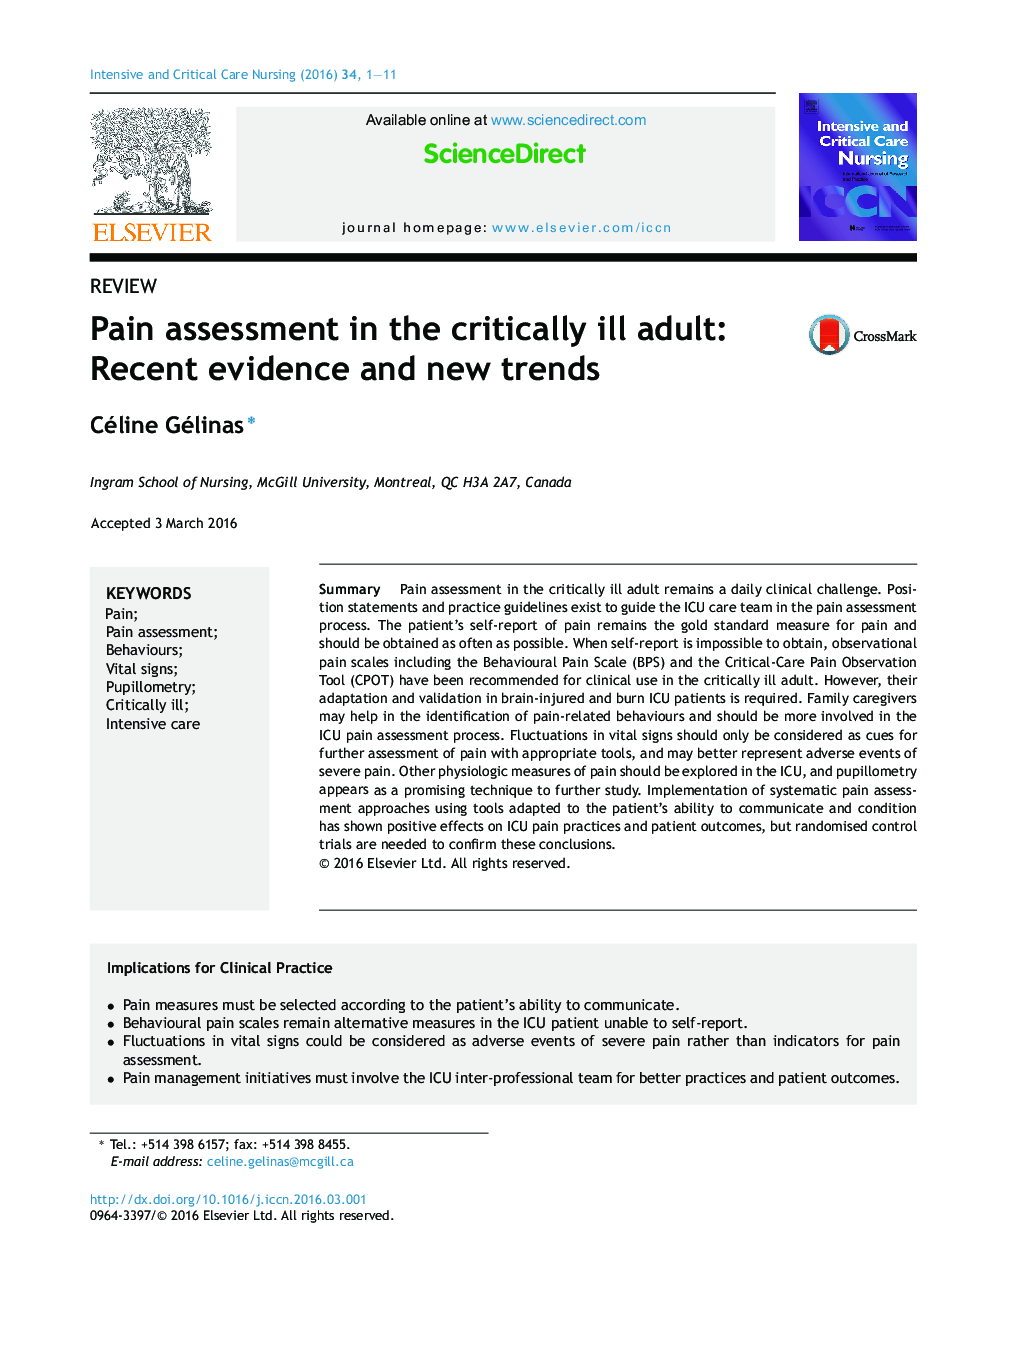 Pain assessment in the critically ill adult: Recent evidence and new trends